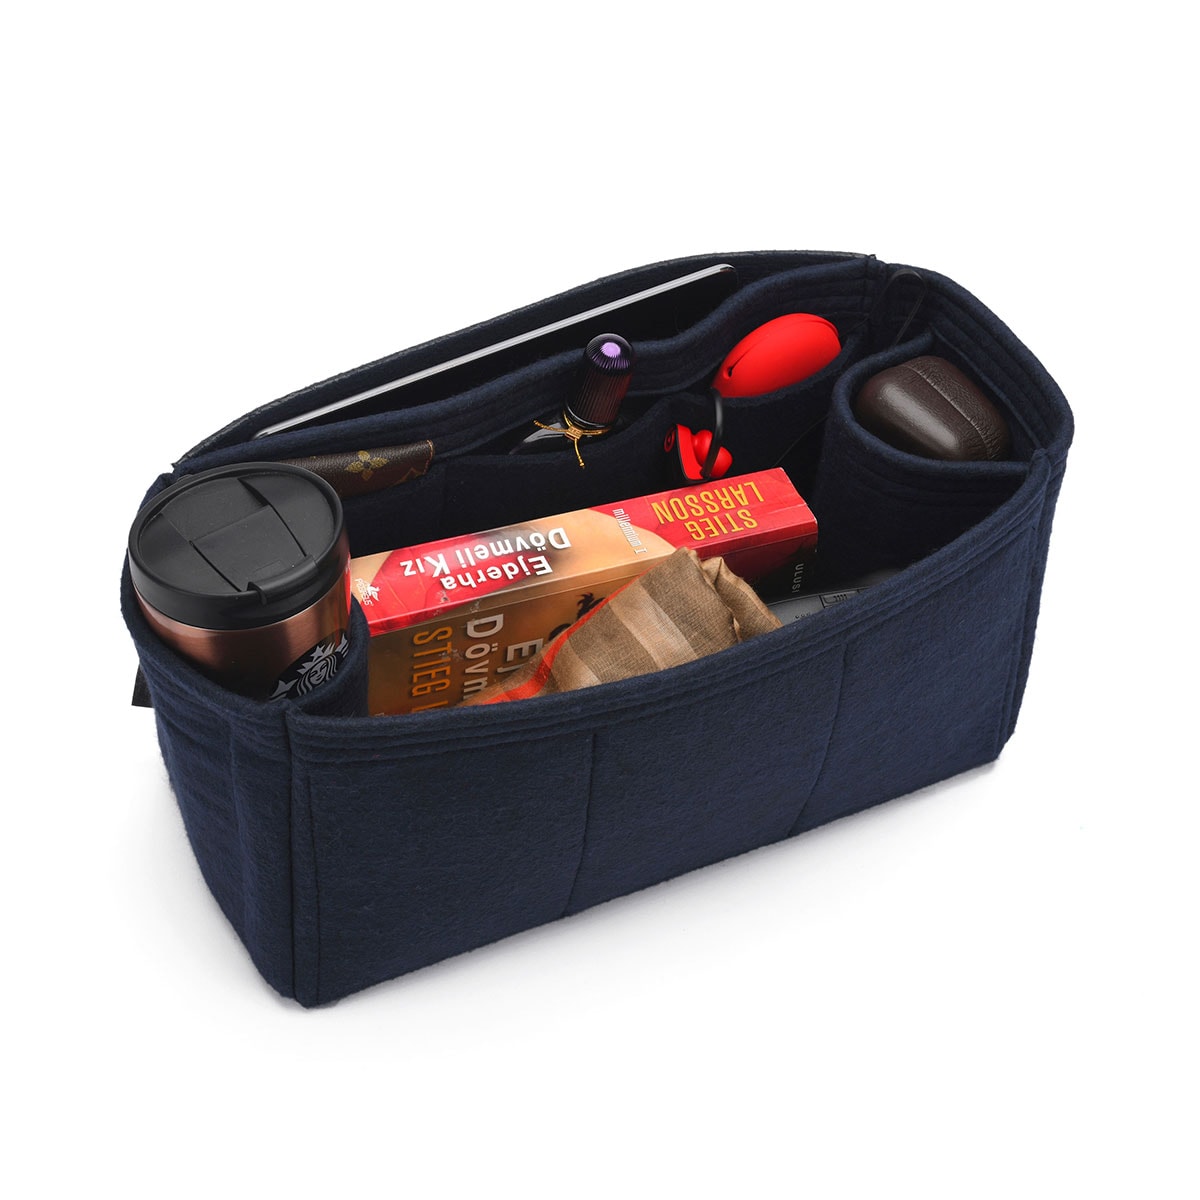 Tote Bag Organizer For Louis Vuitton Artsy MM Bag with Double Bottle Holders